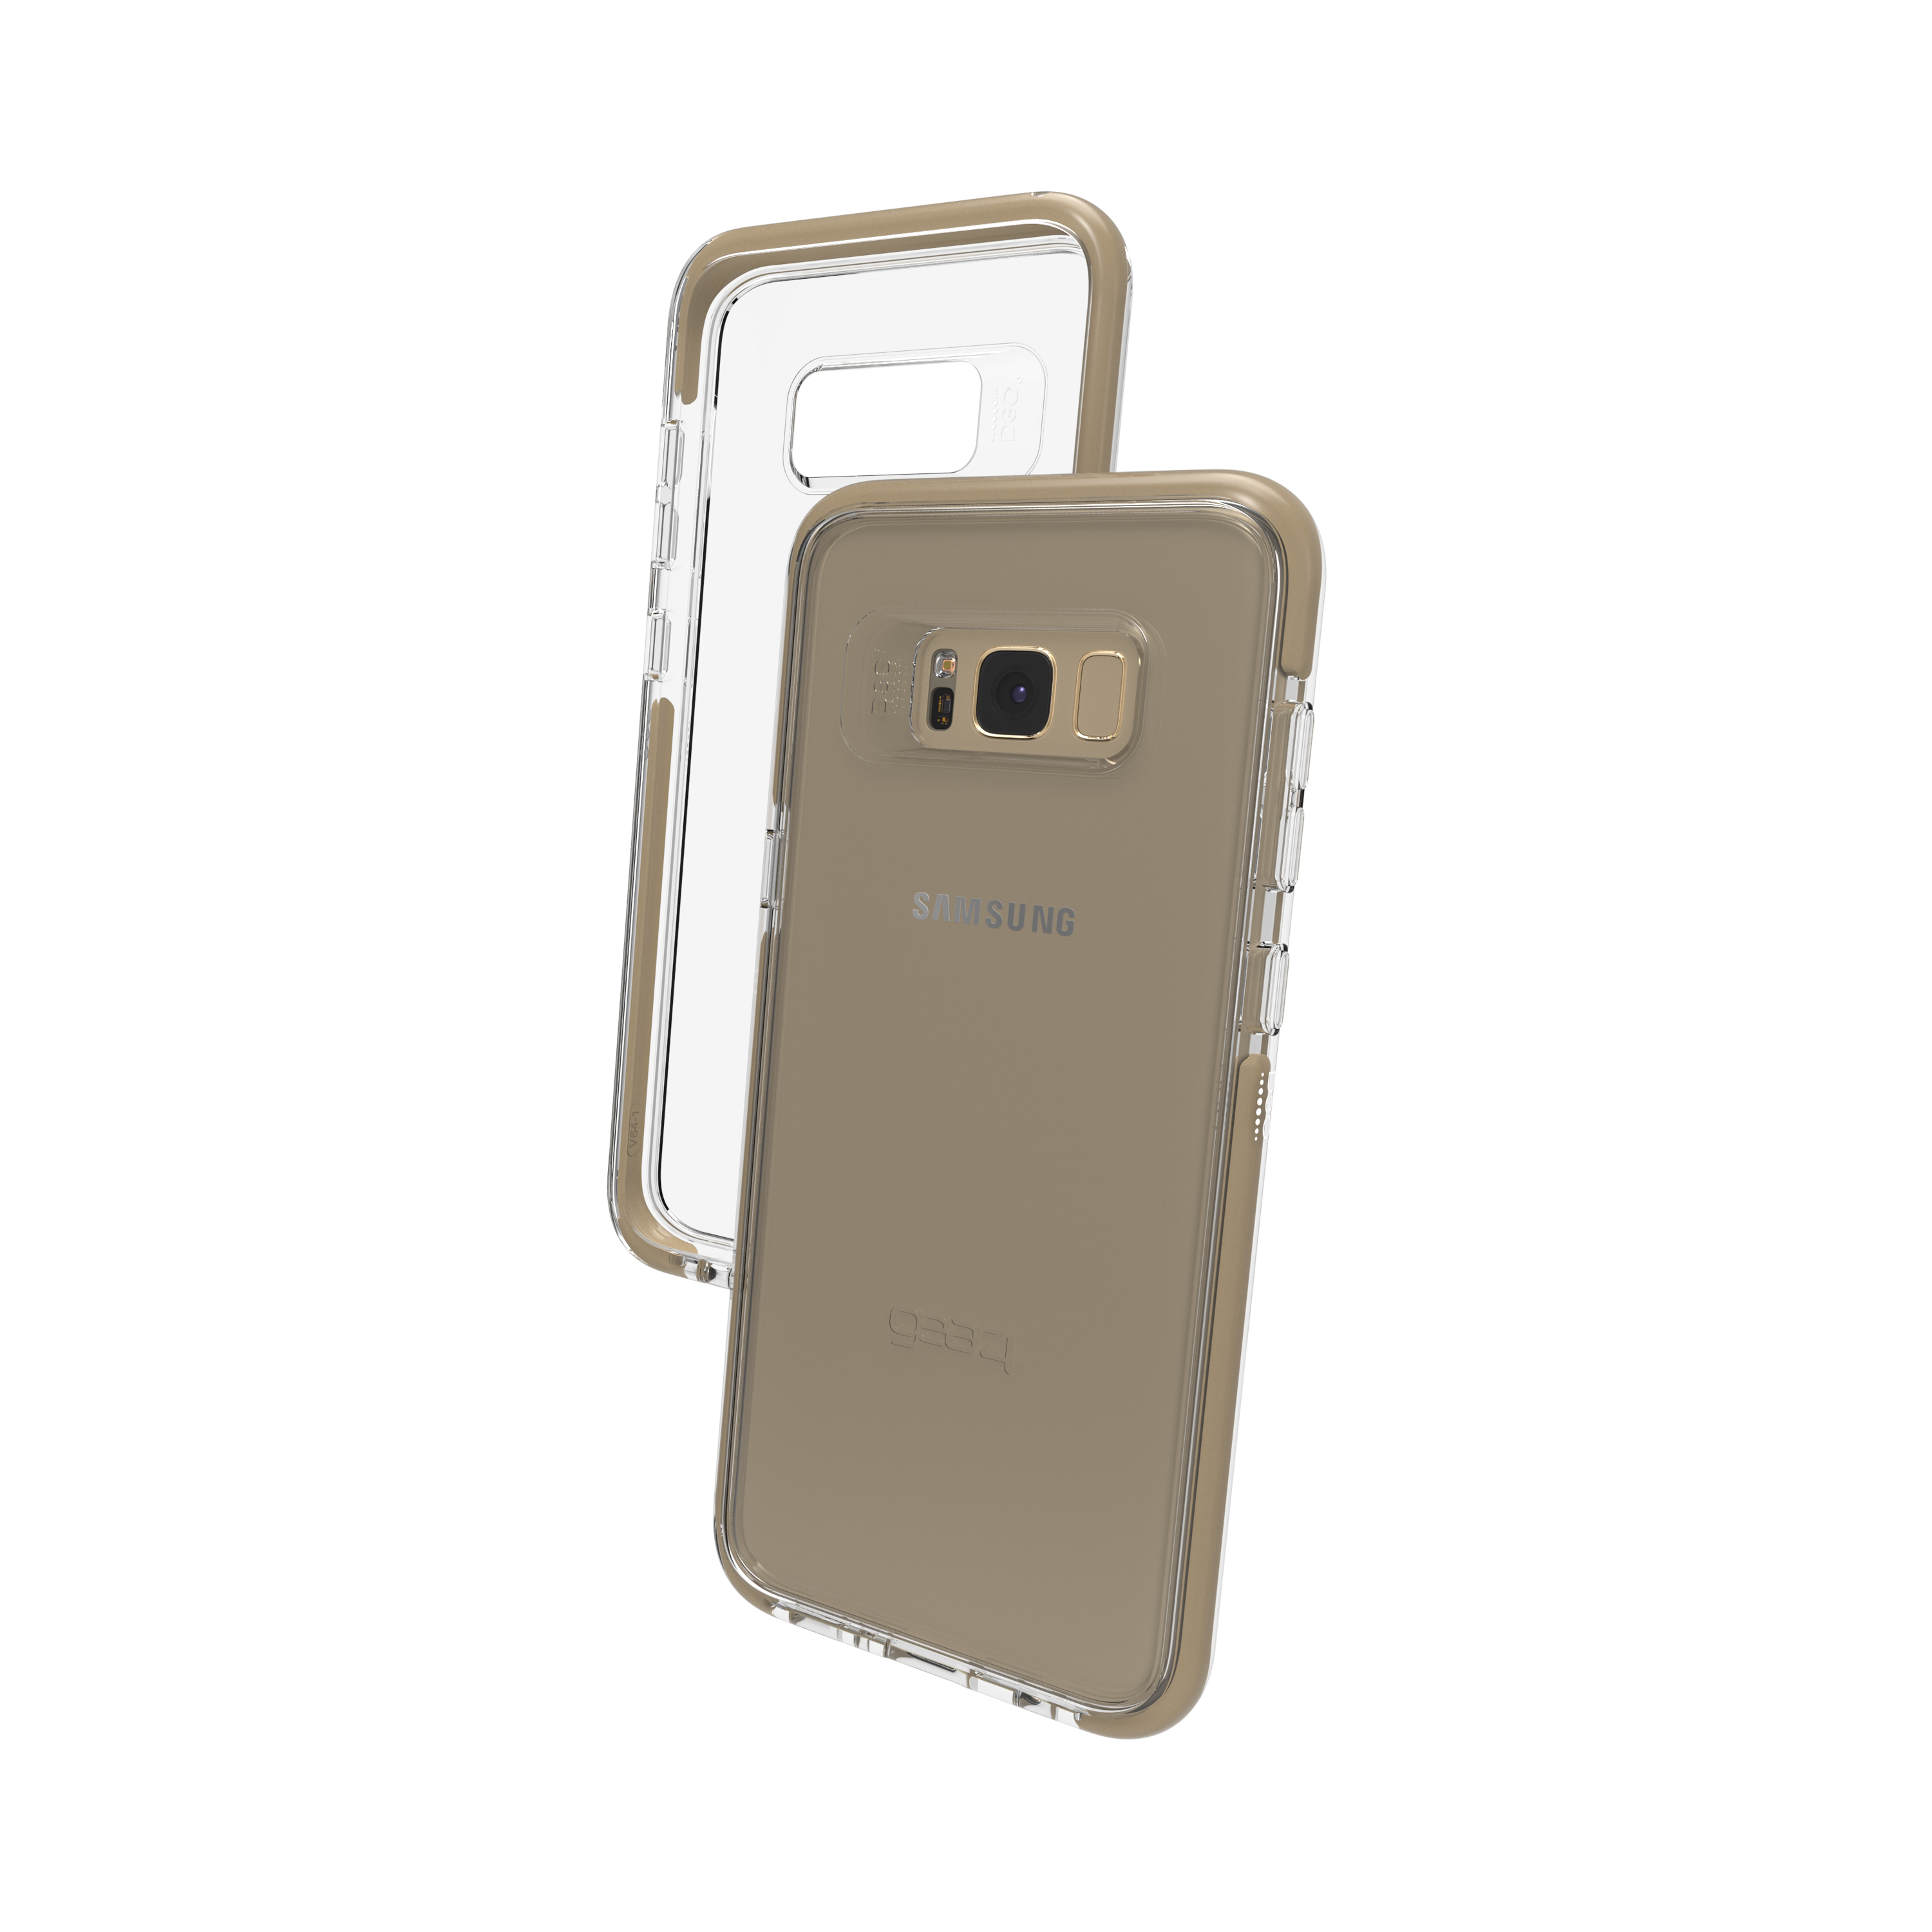 GALAXY Piccadilly, Backcover, SAMSUNG, S8+, GEAR4 GOLD